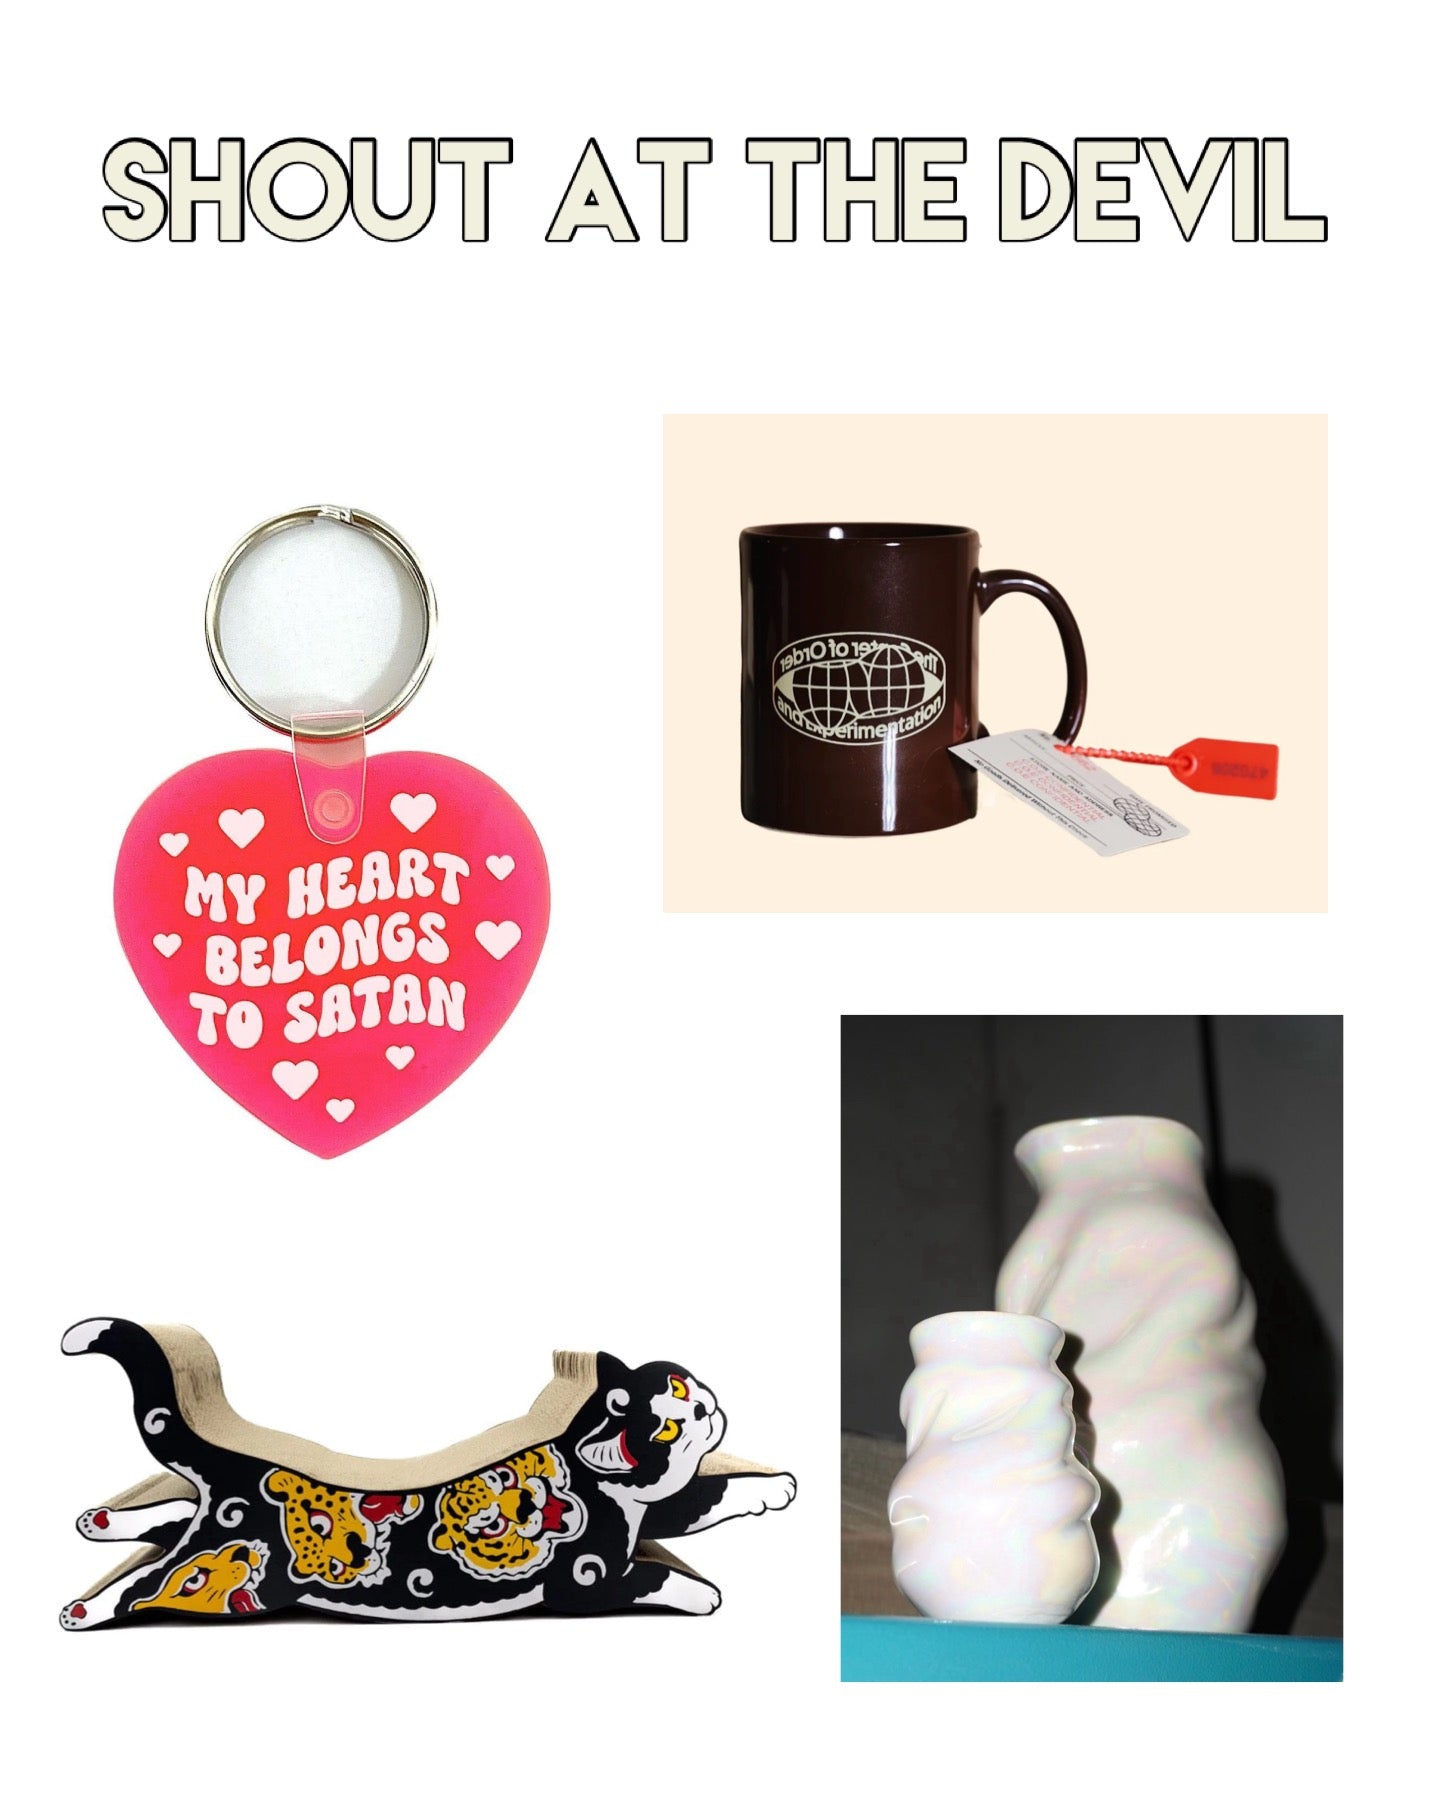 Shout at the devil